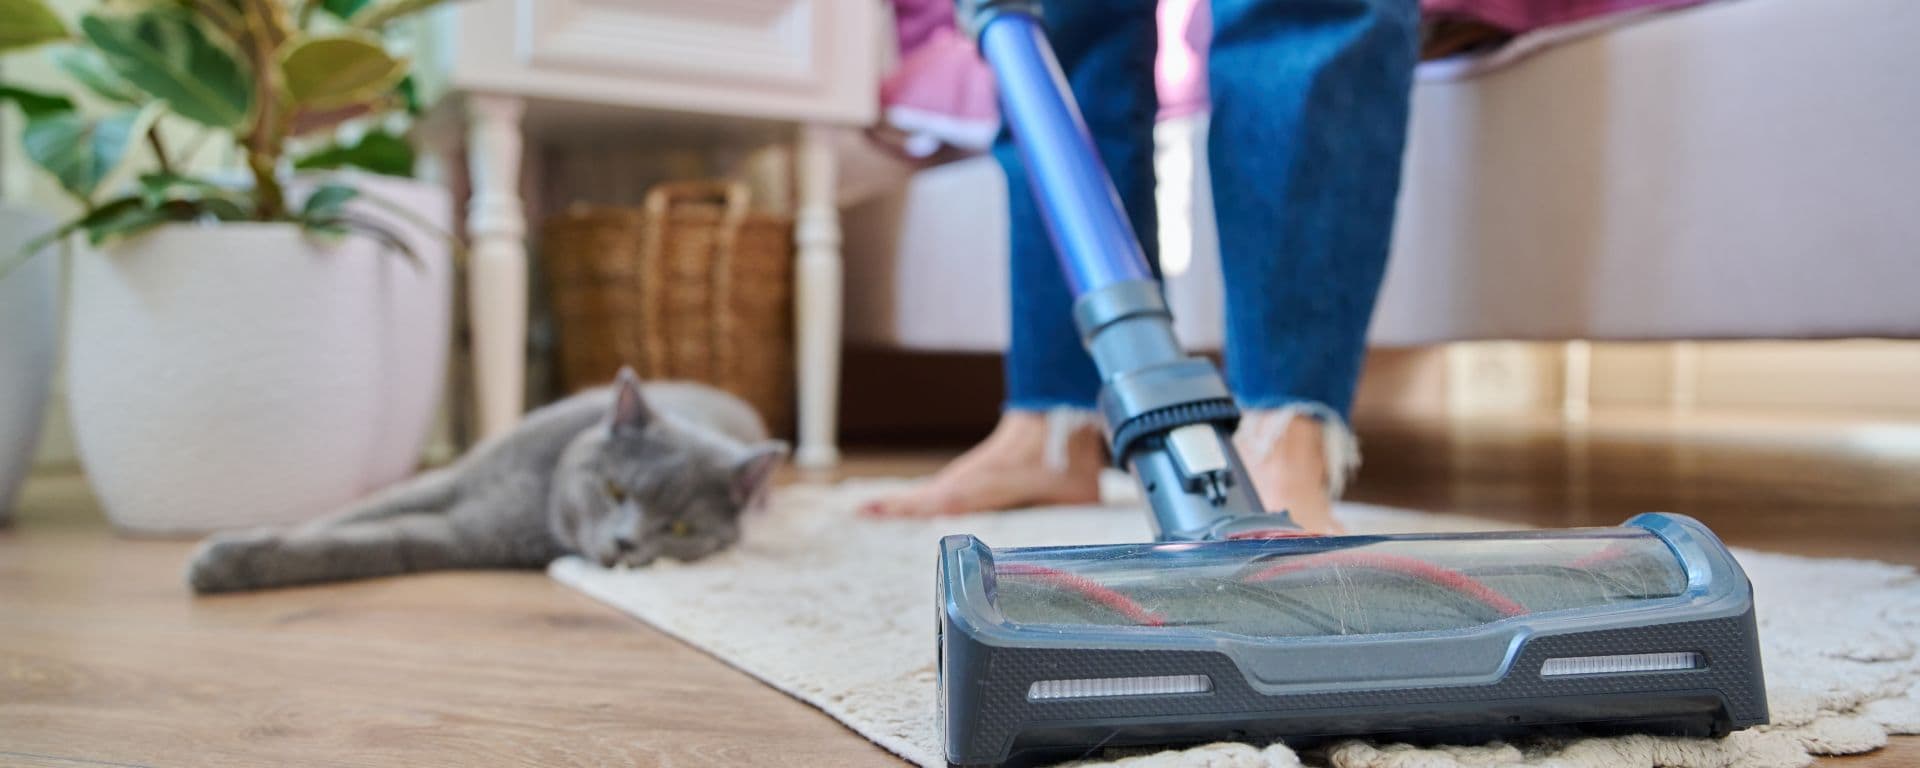 Person vacuuming their carpet with their cat lying in the background.